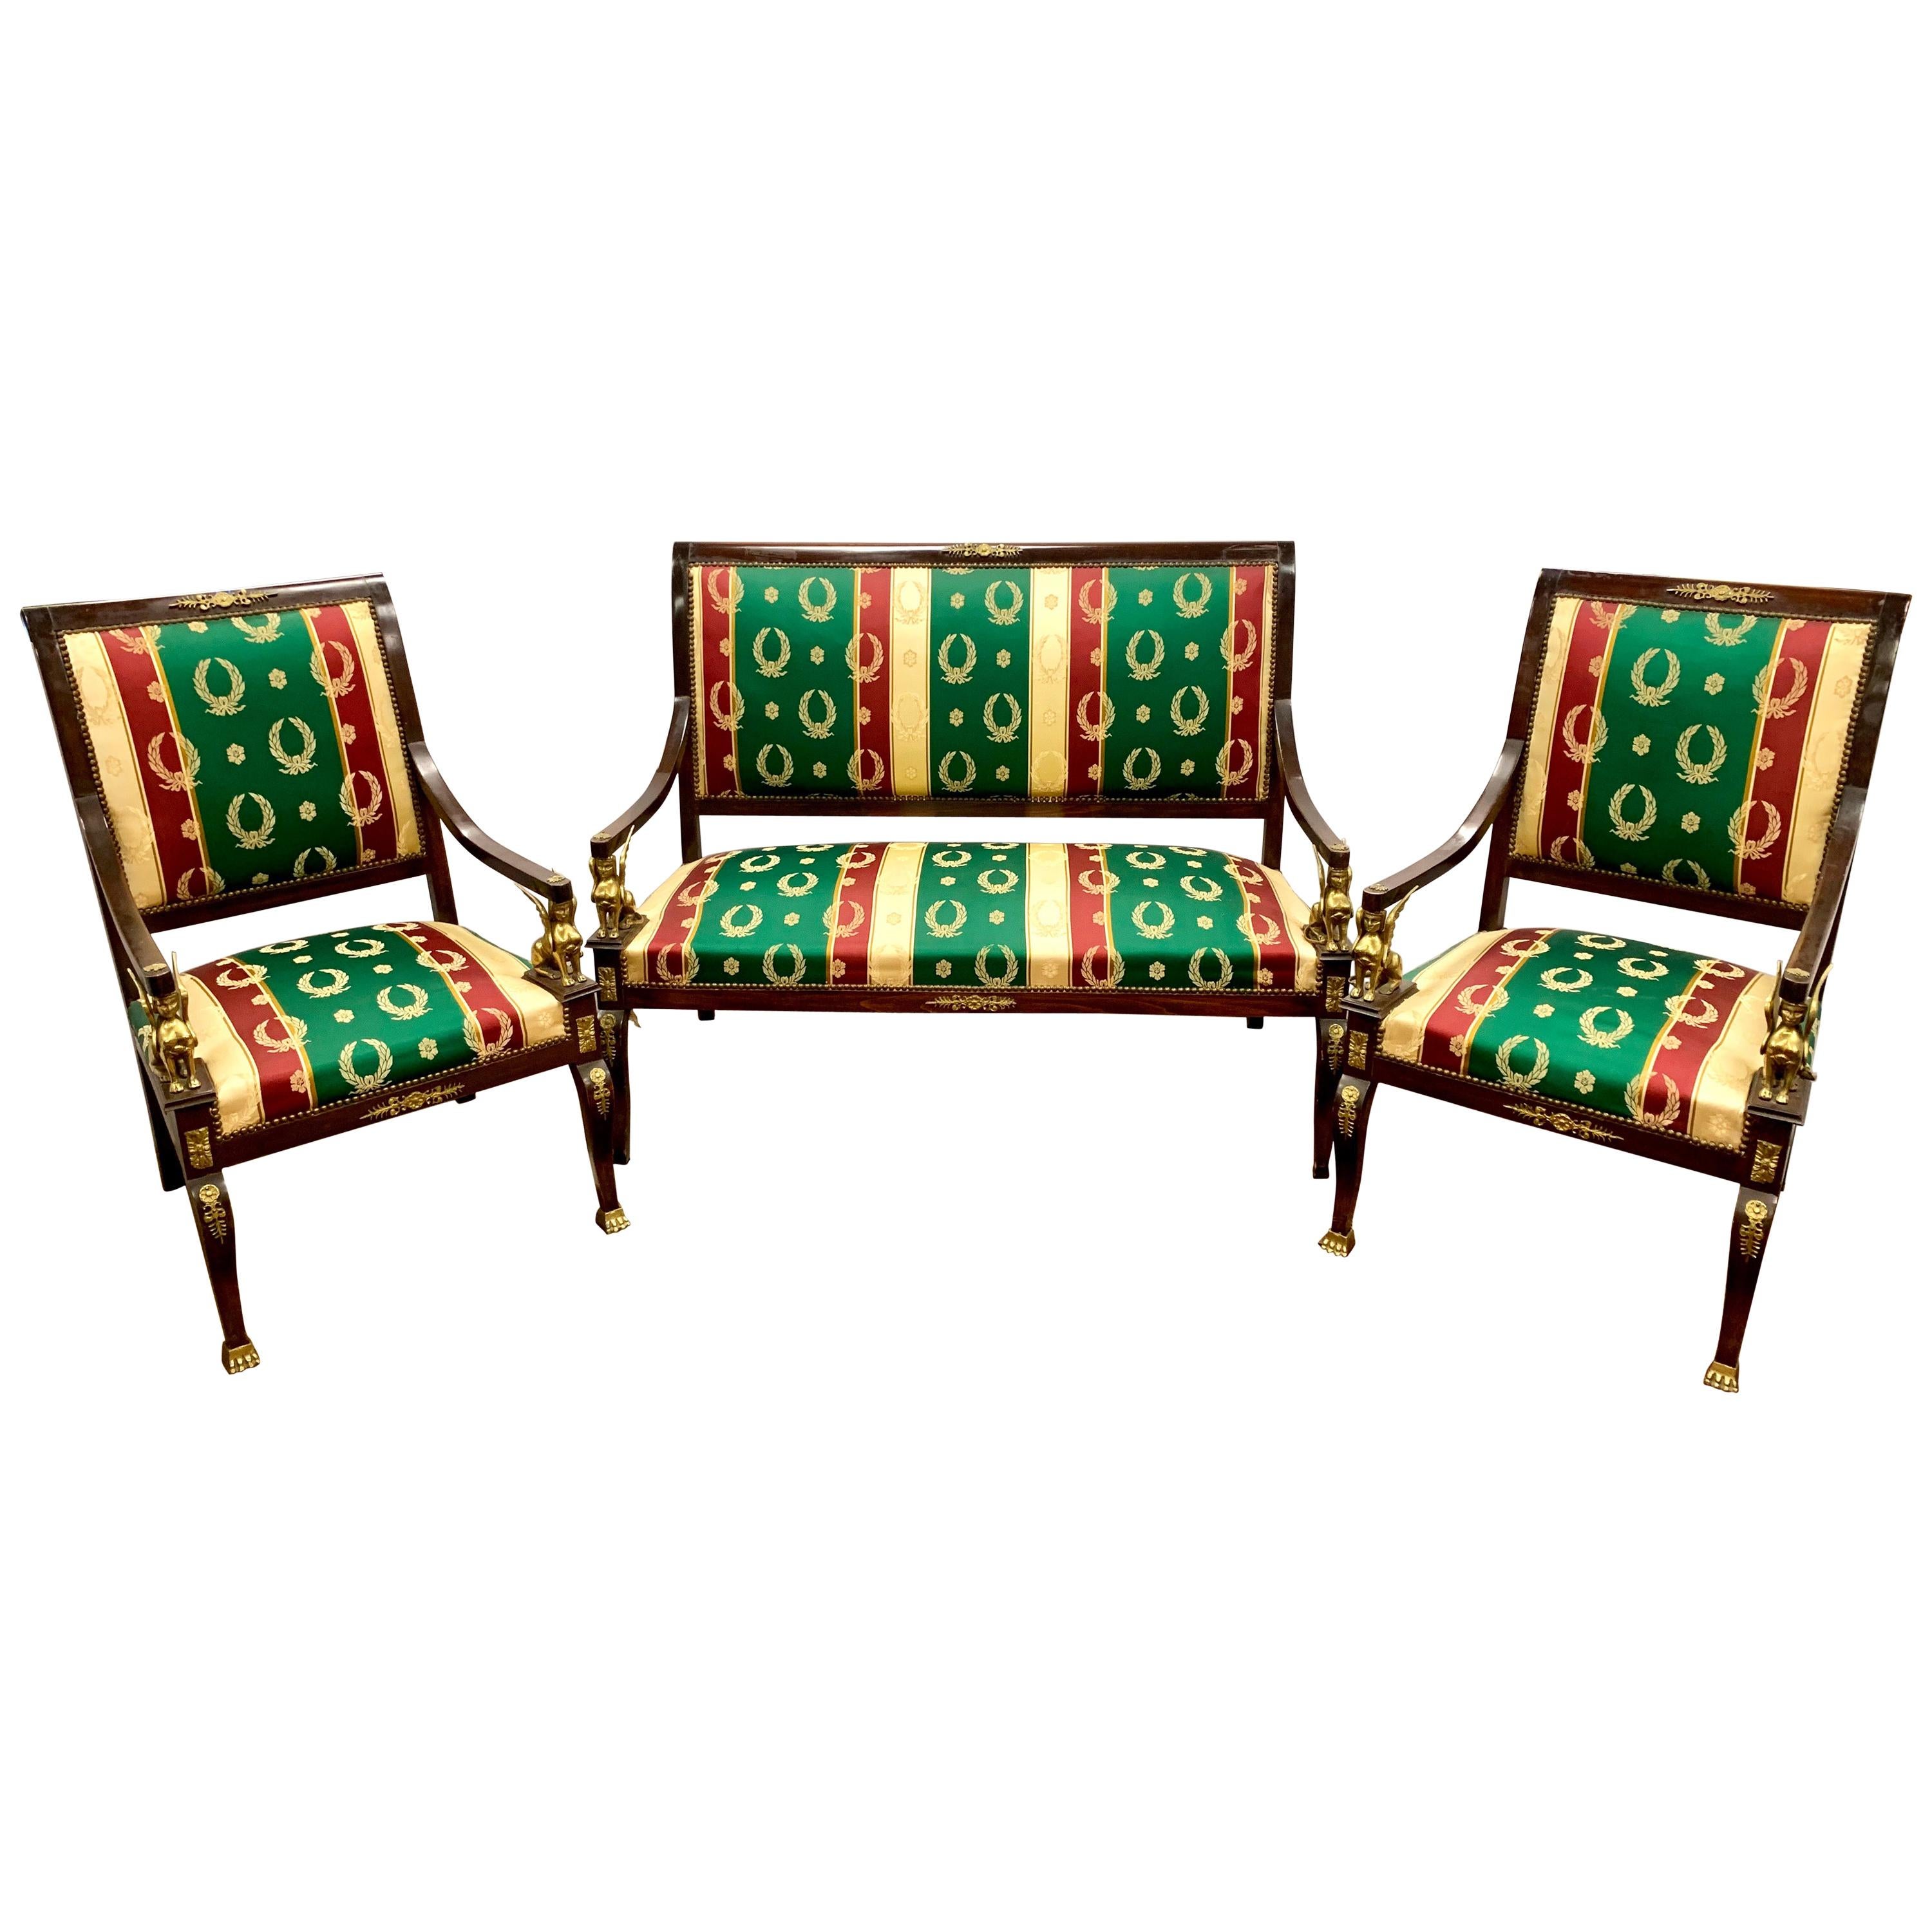 Neoclassical Egyptian Revival 3 Pc Parlor Set, Bench and Pair of Chairs Ormolu